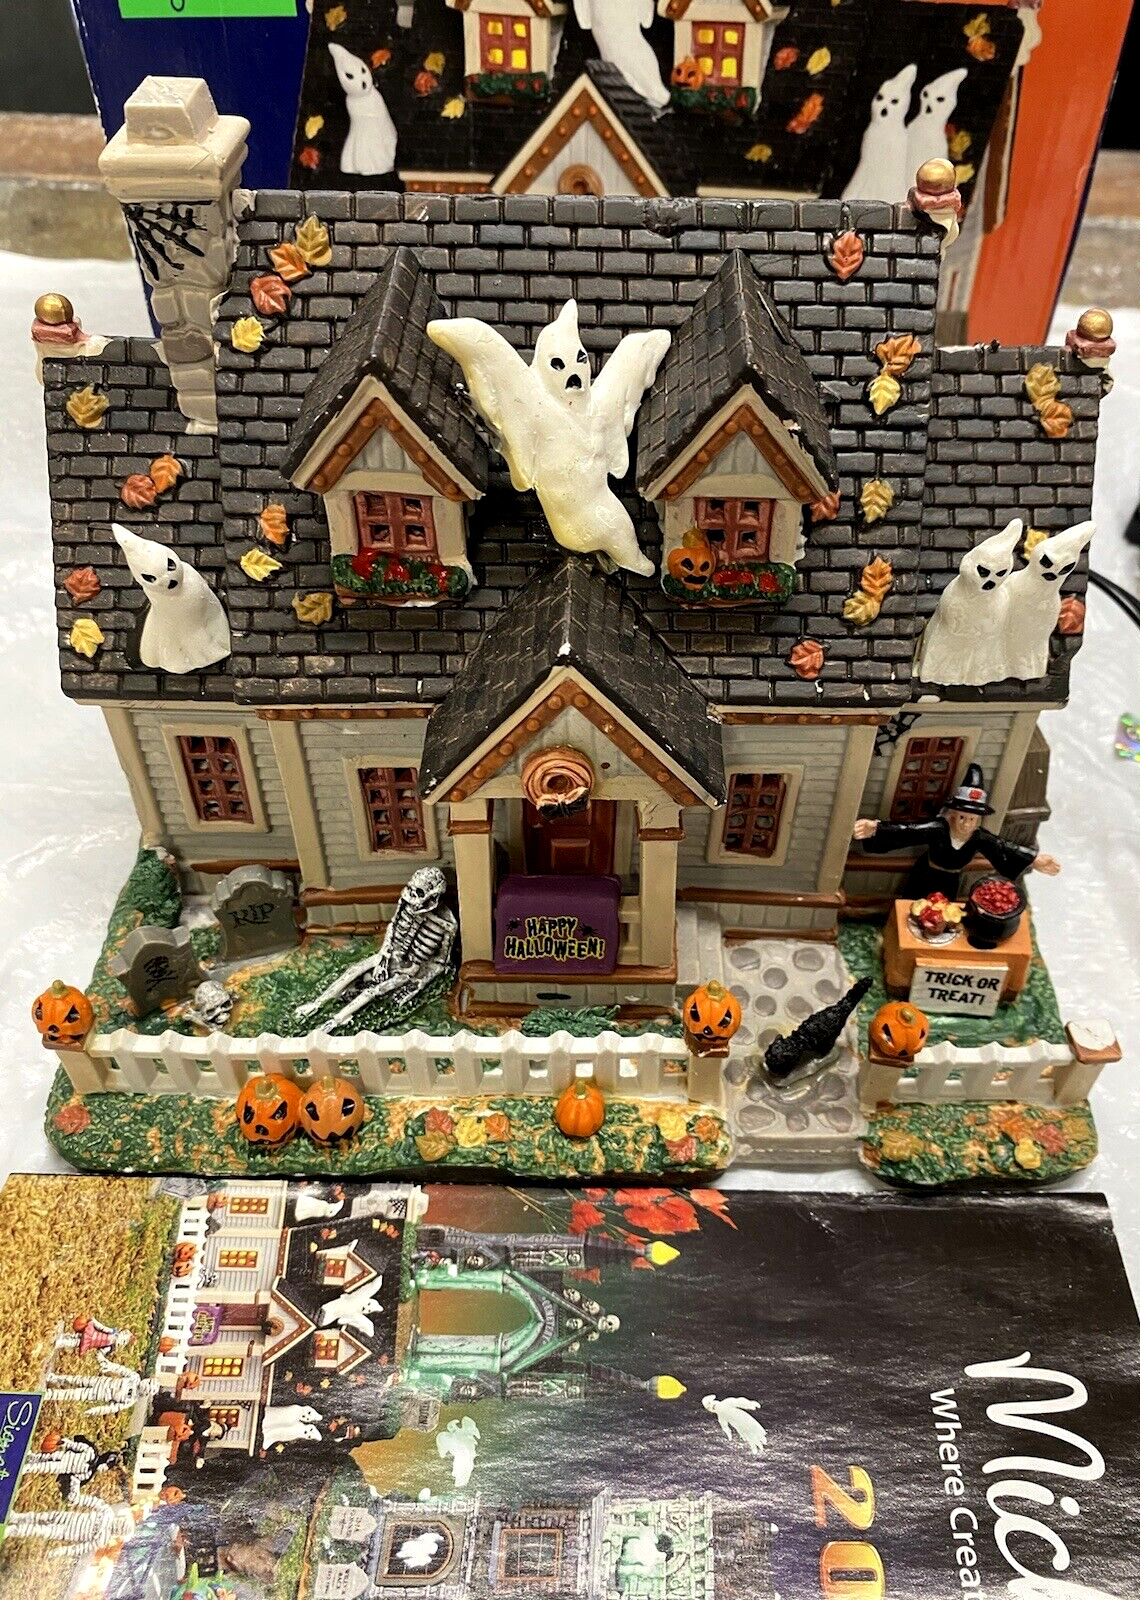 Lemax Spooky Town 